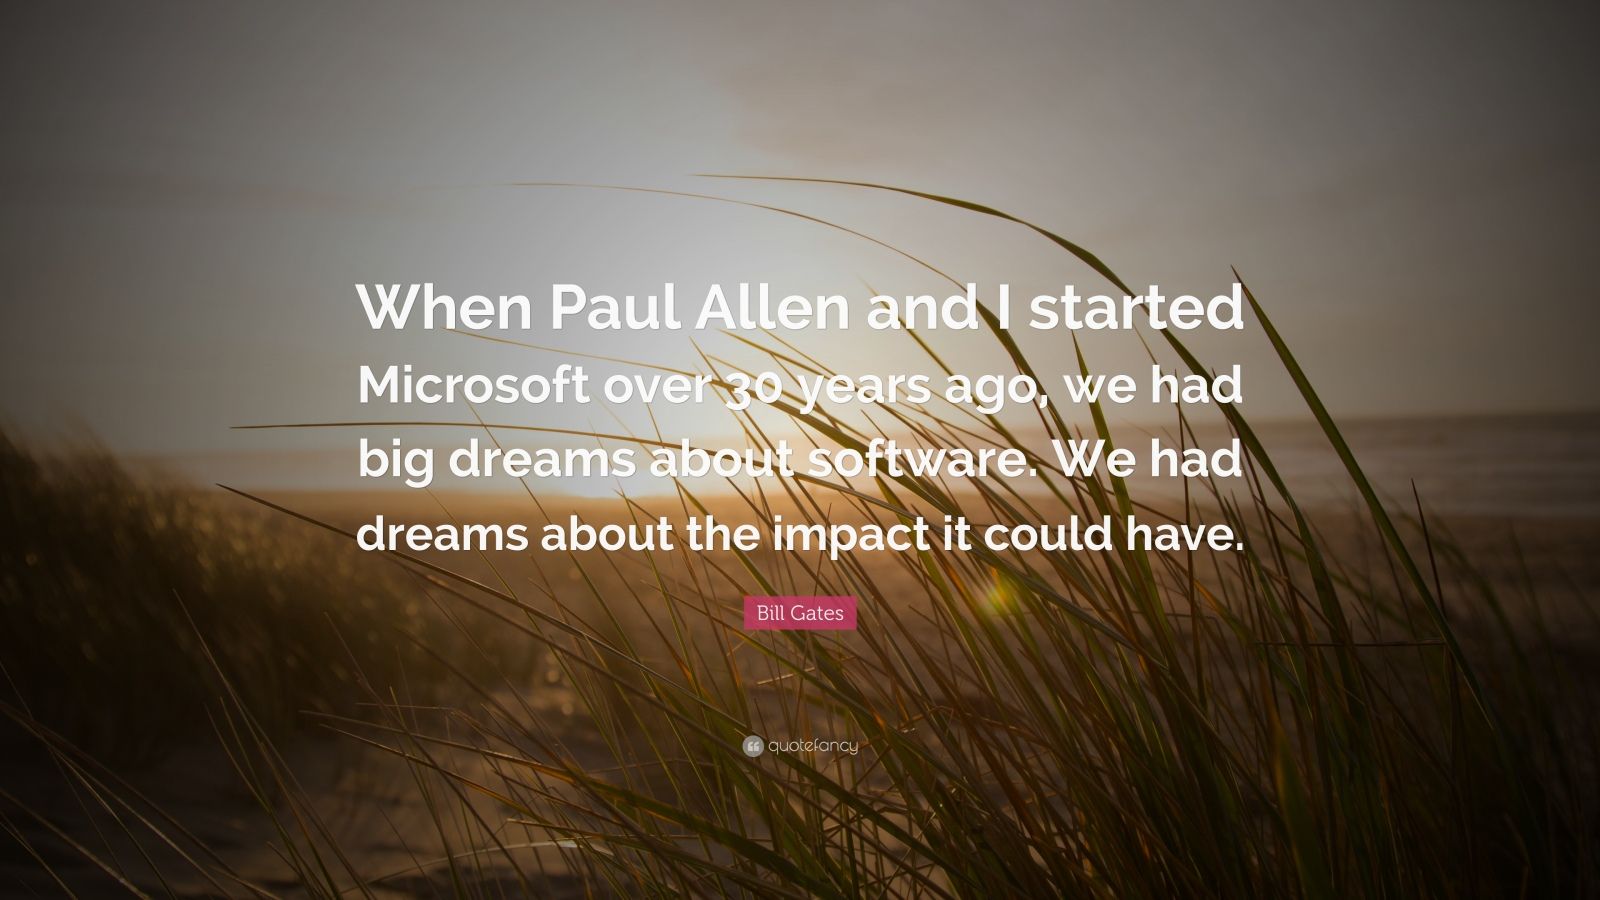 Bill Gates Quote: “When Paul Allen and I started Microsoft over 30 years ago, we had big dreams about software. We had dreams about the imp...”